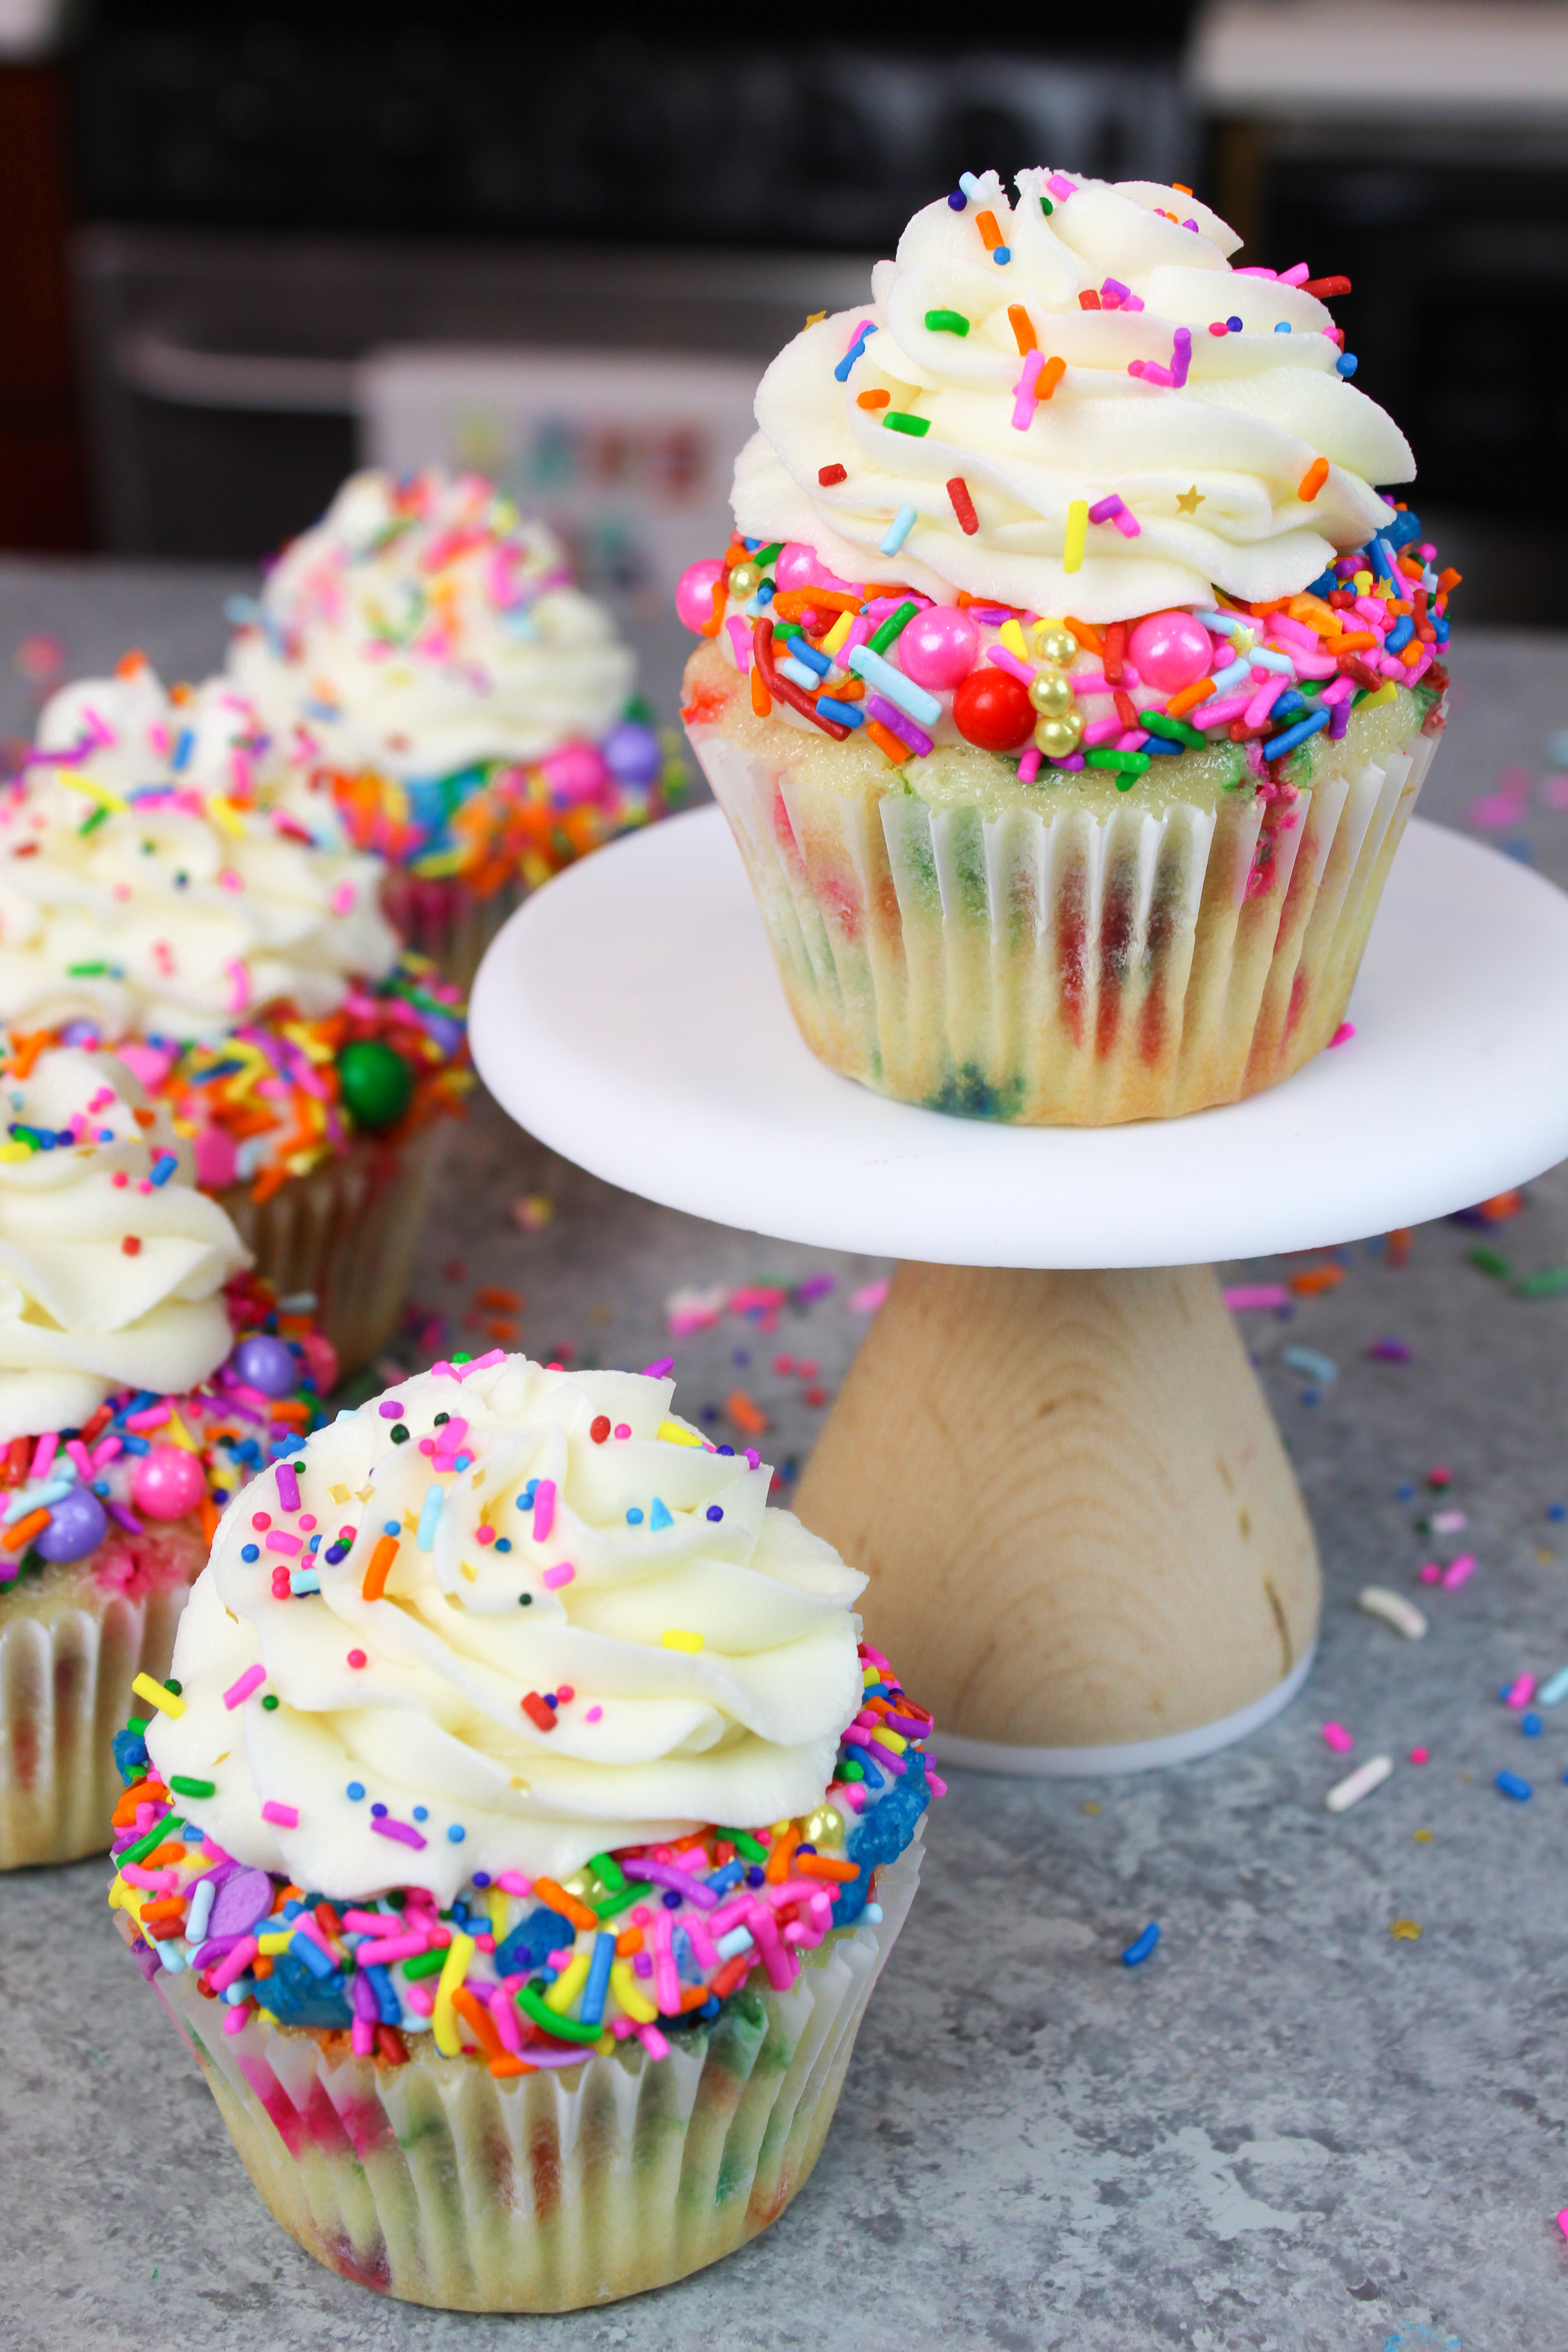 Funfetti Cupcake Recipe With Vanilla Frosting - Chelsweets